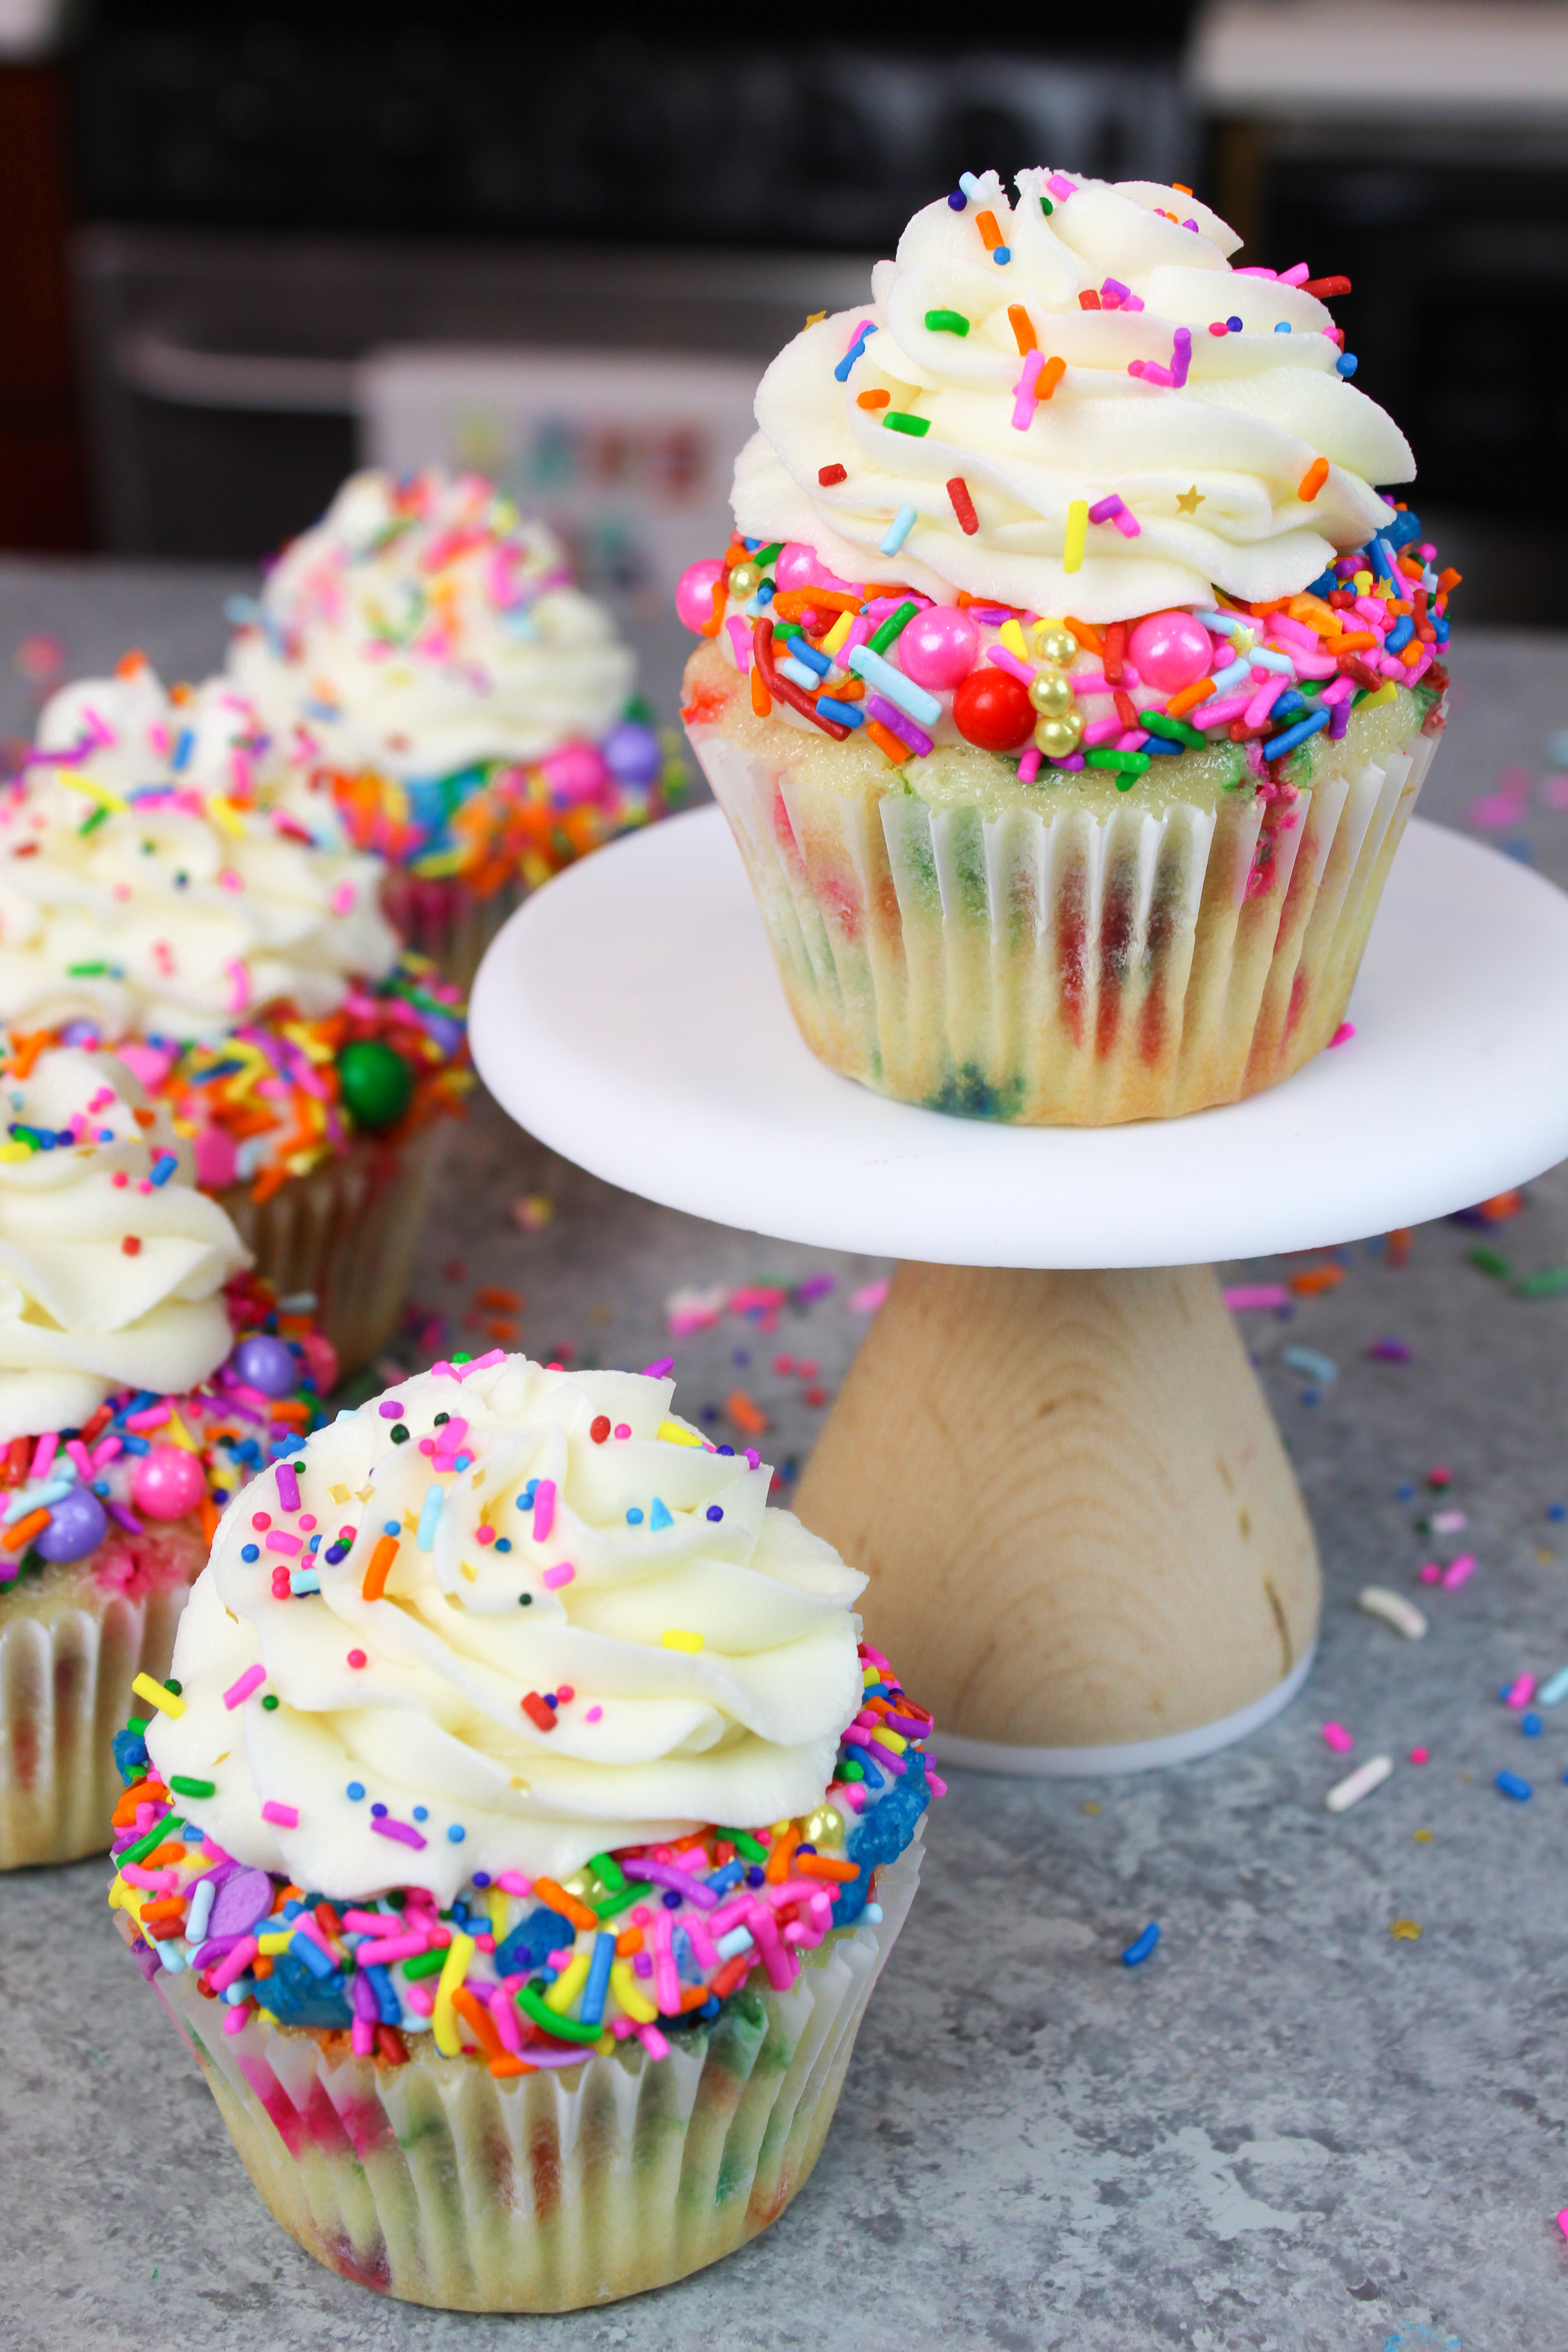 Funfetti Cupcake Recipe With Vanilla Frosting - Chelsweets